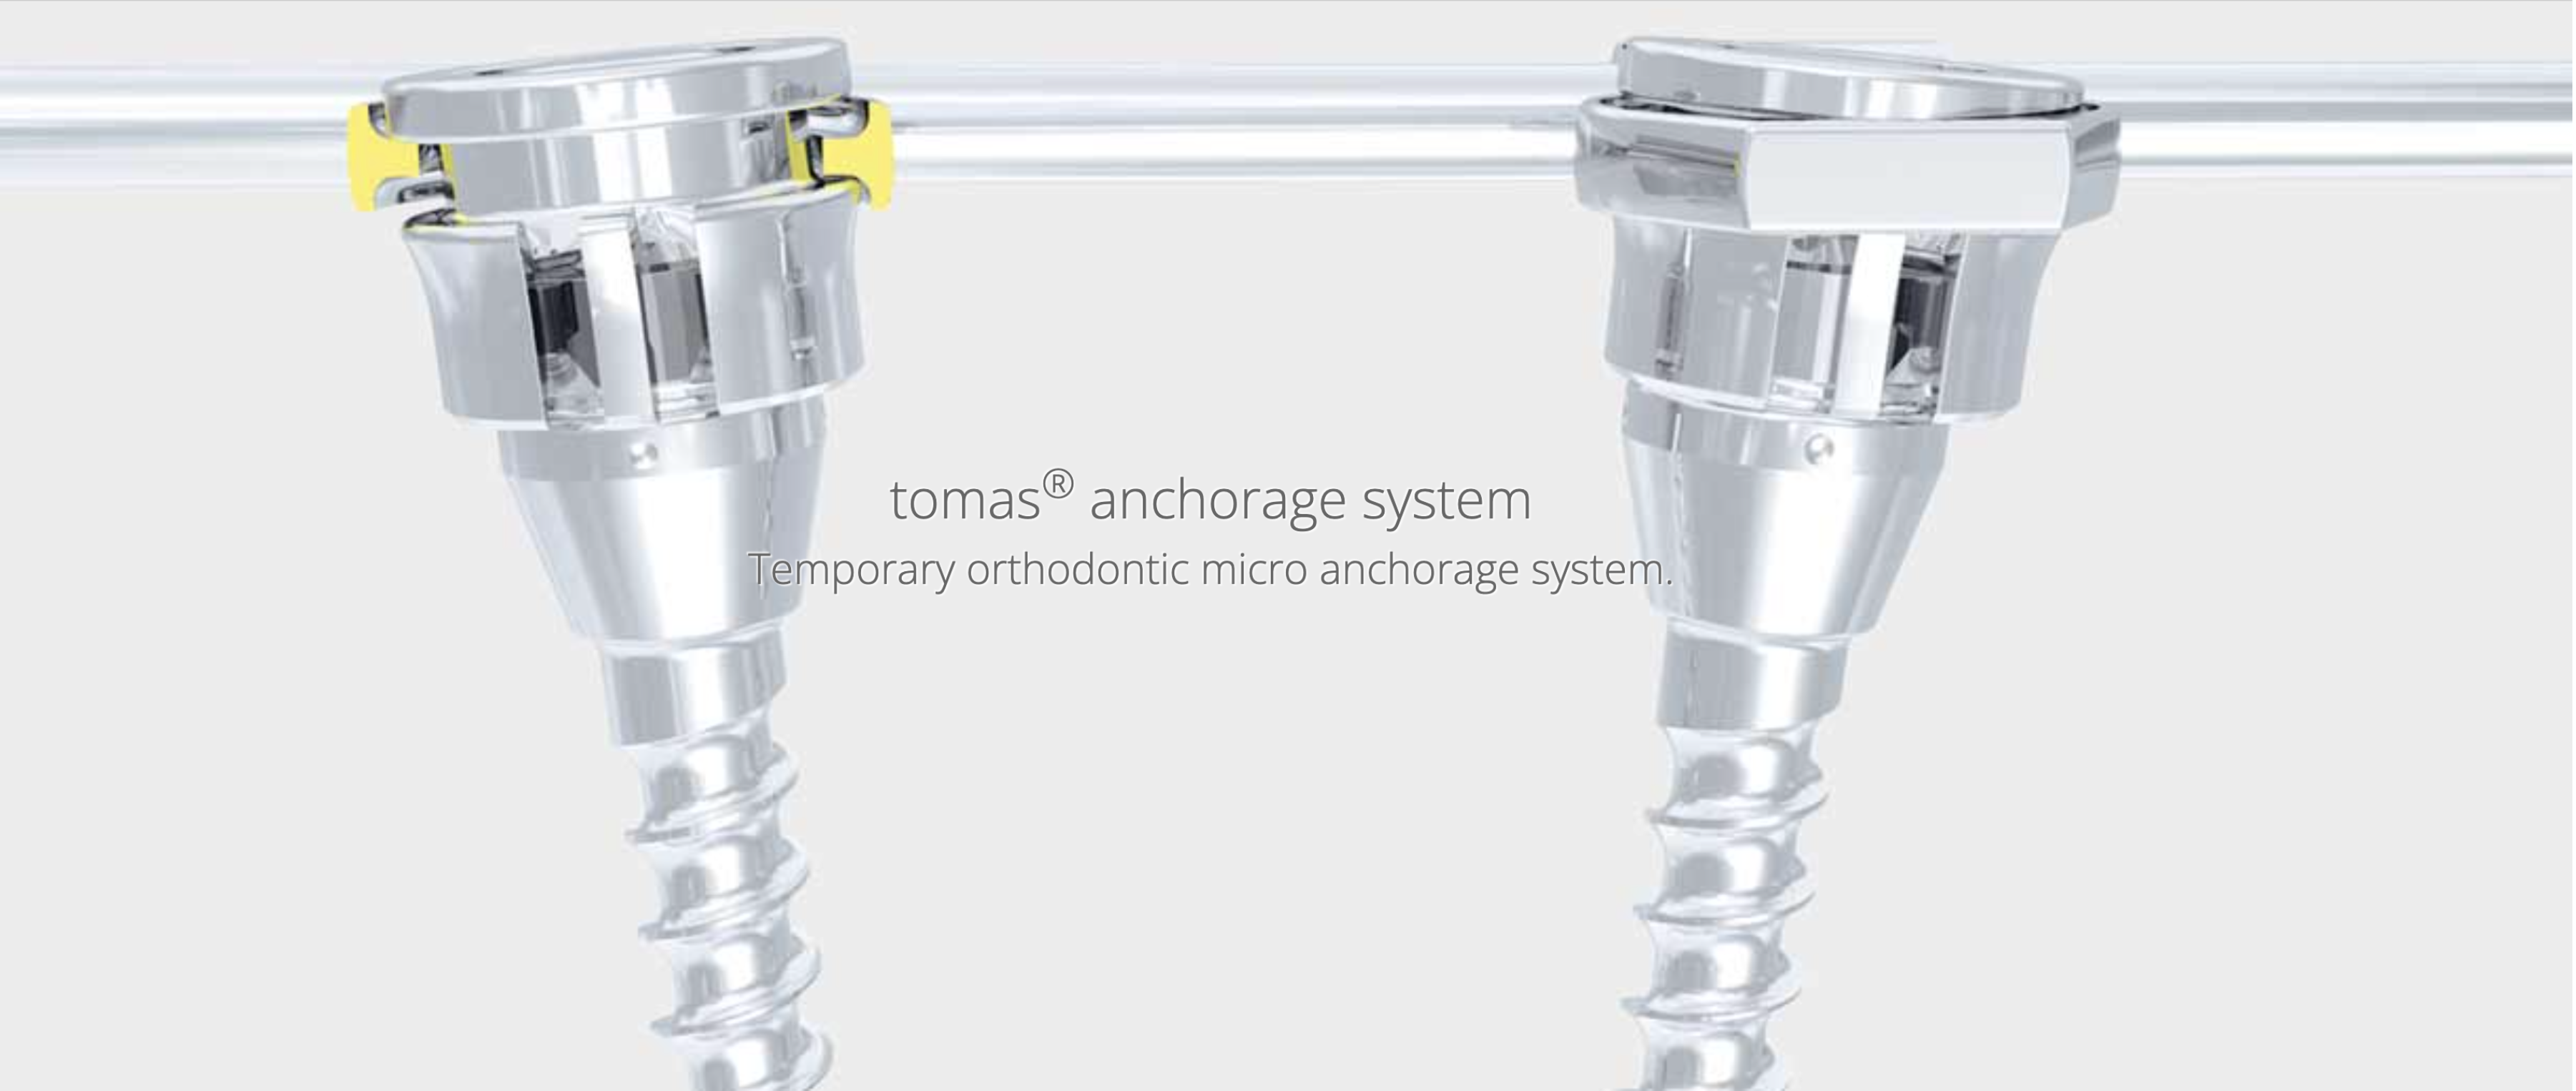 tomas® anchorage system